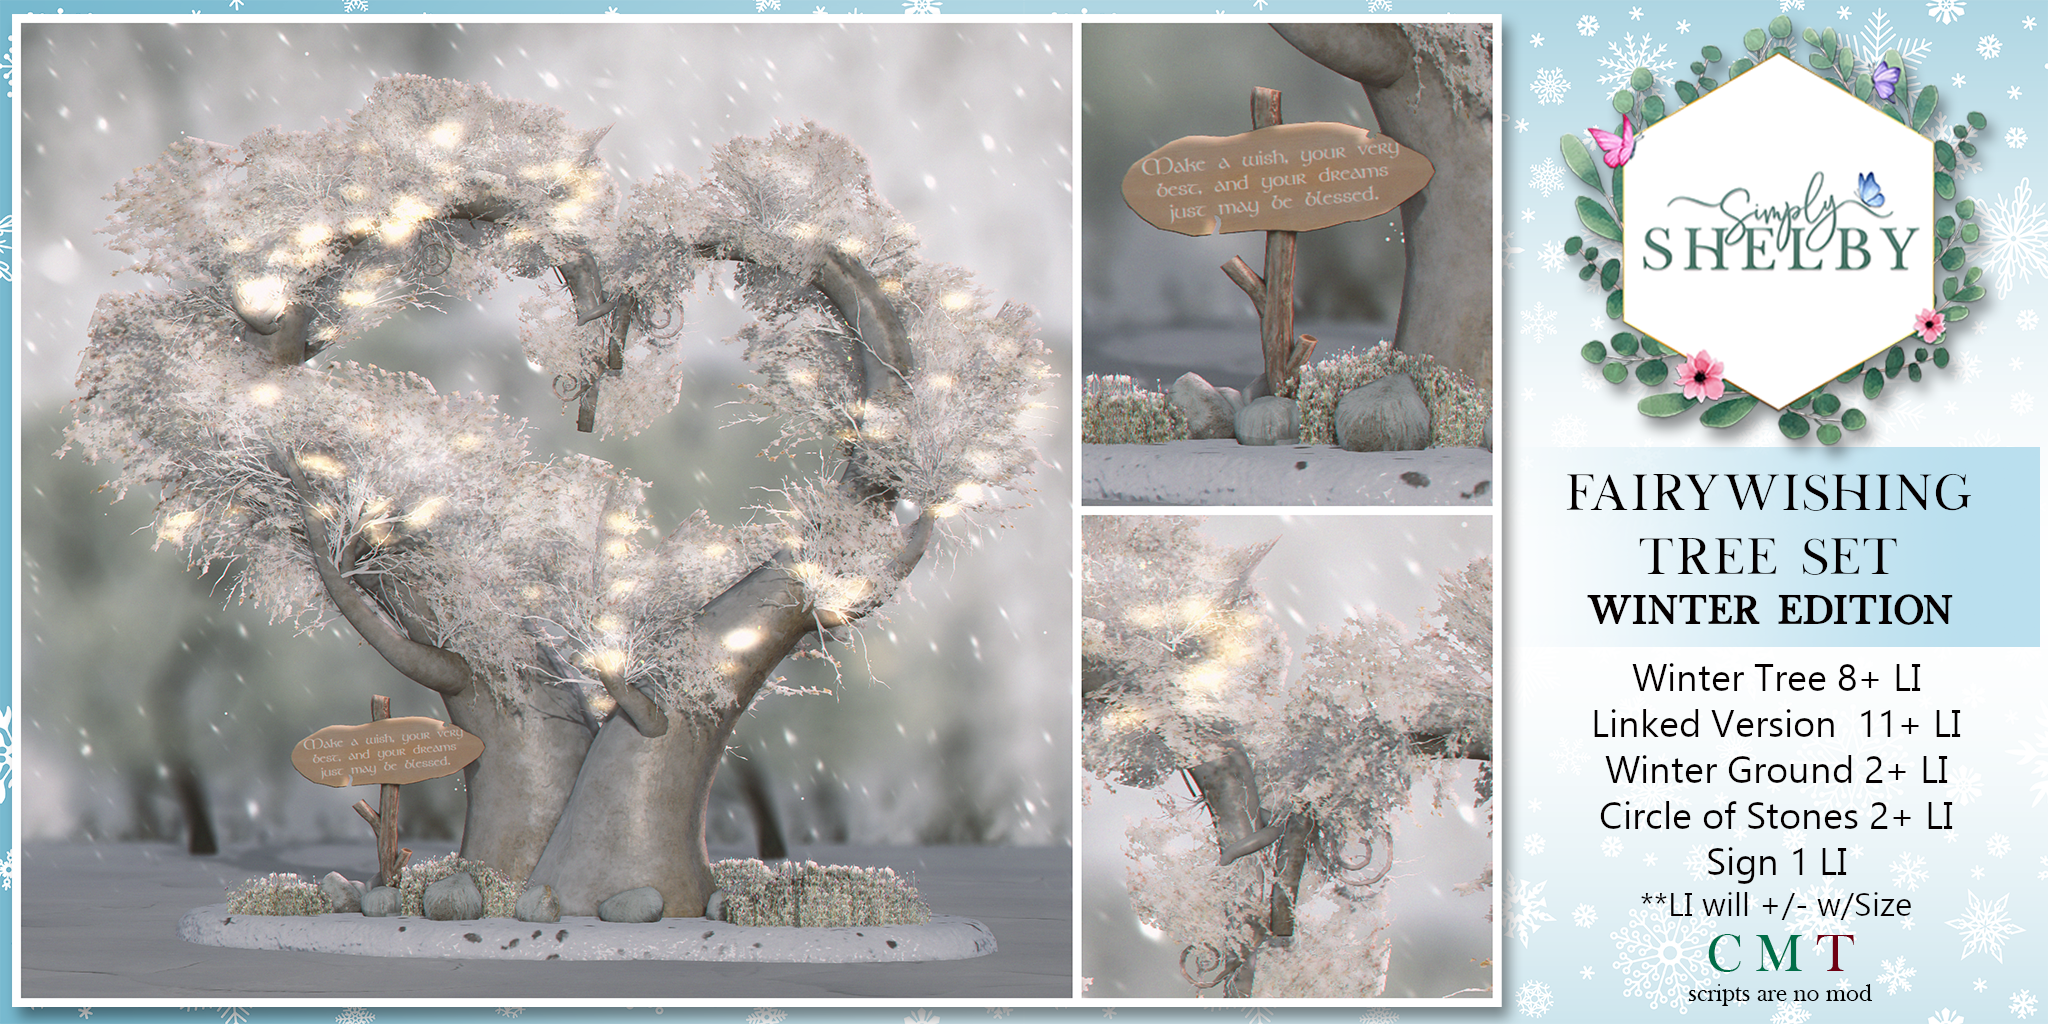 Simply Shelby – Fairy Wishing Tree & Egyptian Inspired Fireplace